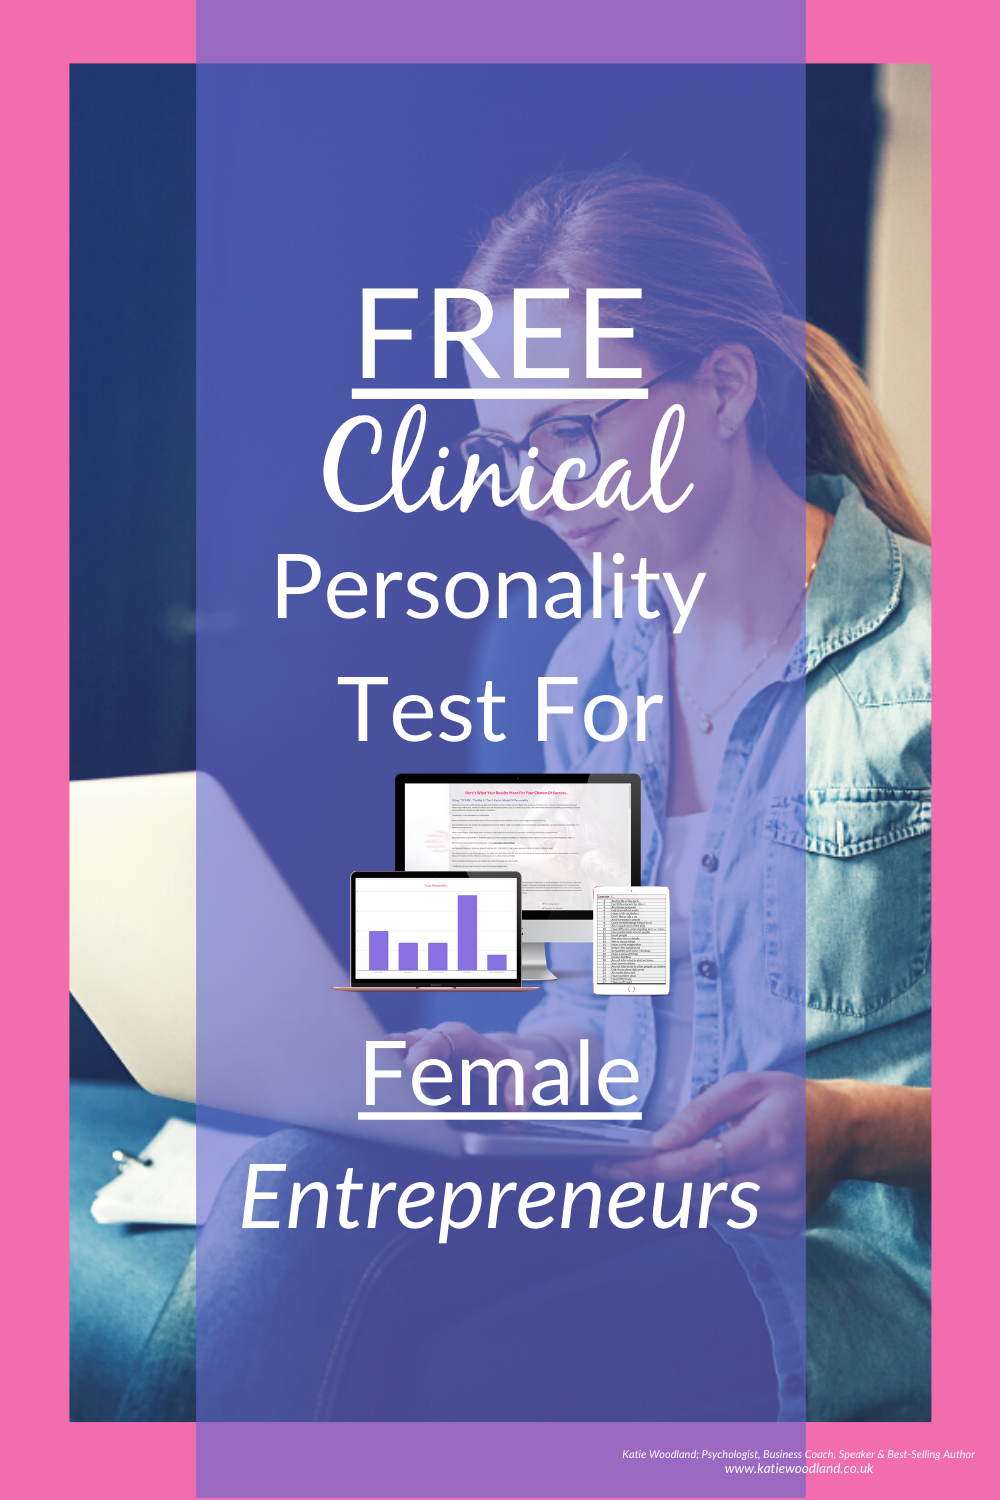 Discover how you can get your hands on the clinical personality test designed specifically for female entrepreneurs for FREE so that you can effortlessly utilise your unique skills, abilities and personality to get more customers and avoid sabotaging your chances of success without even realising!